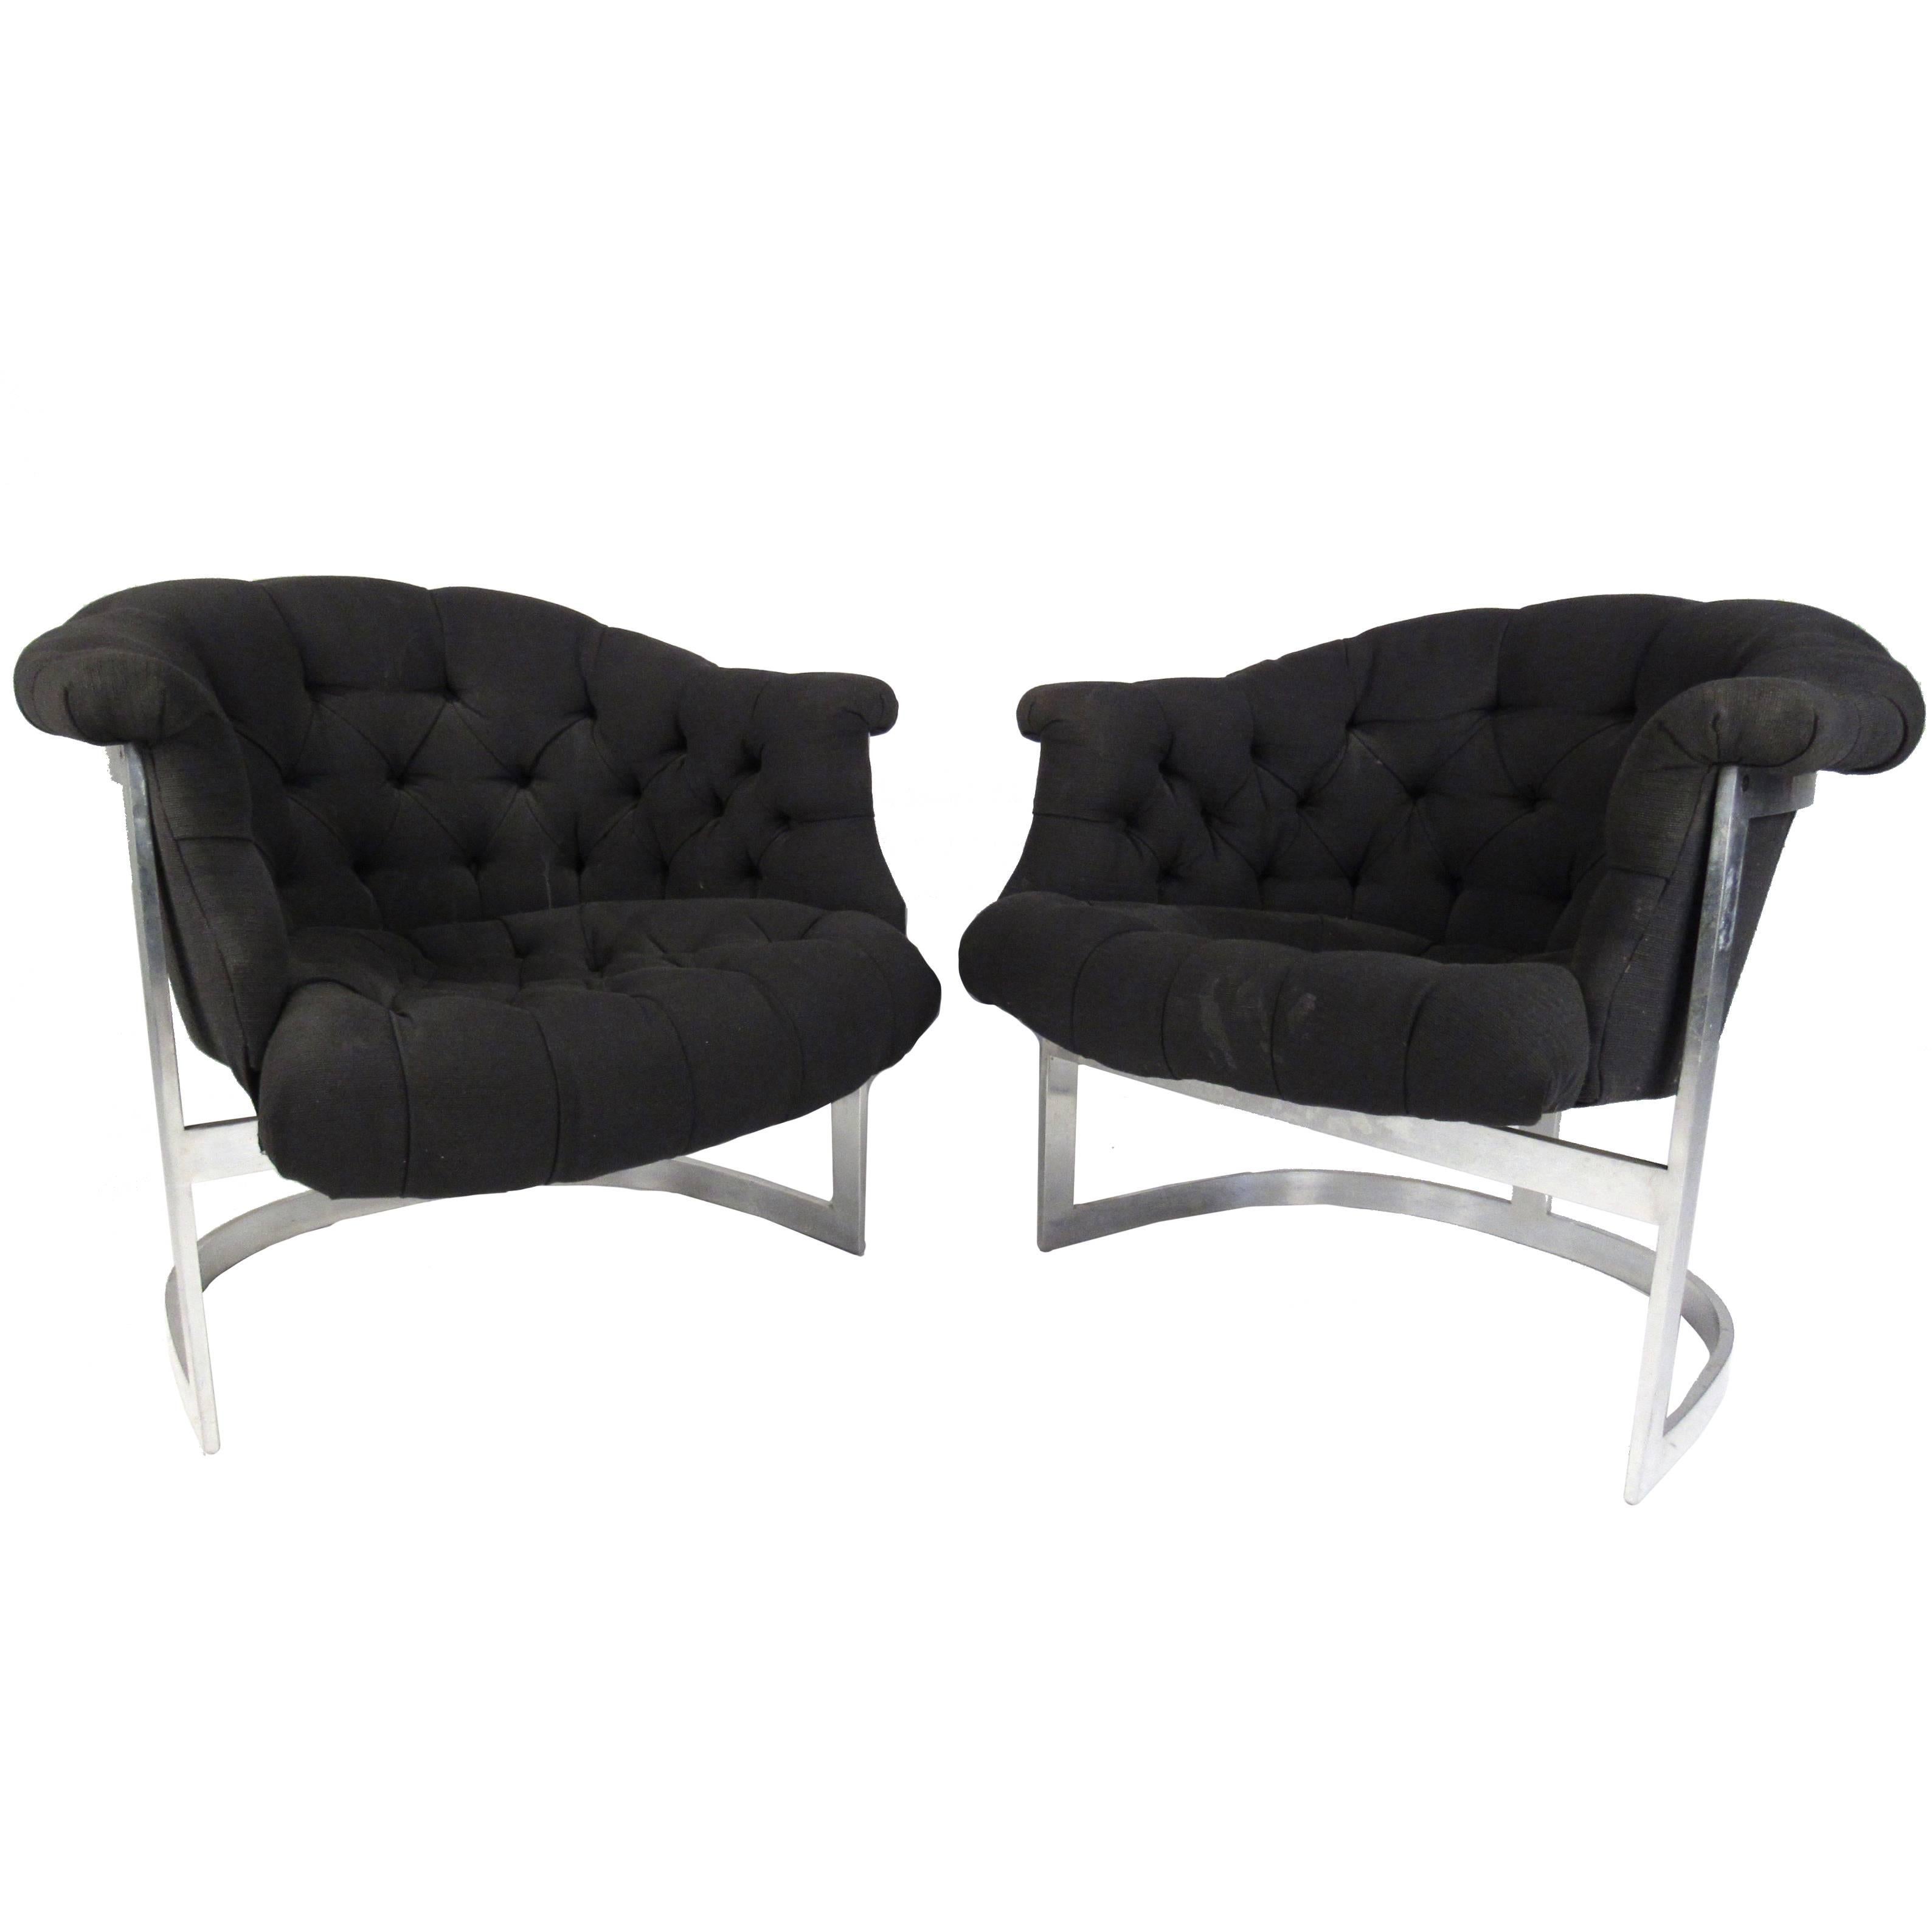 This pair of vintage modern tub style lounge chairs feature the unique barrel back style design of Mid-Century master Milo Baughman. The overstuffed seats are covered in tufted black upholstery and boast winged arm rests. The chrome cantilever base